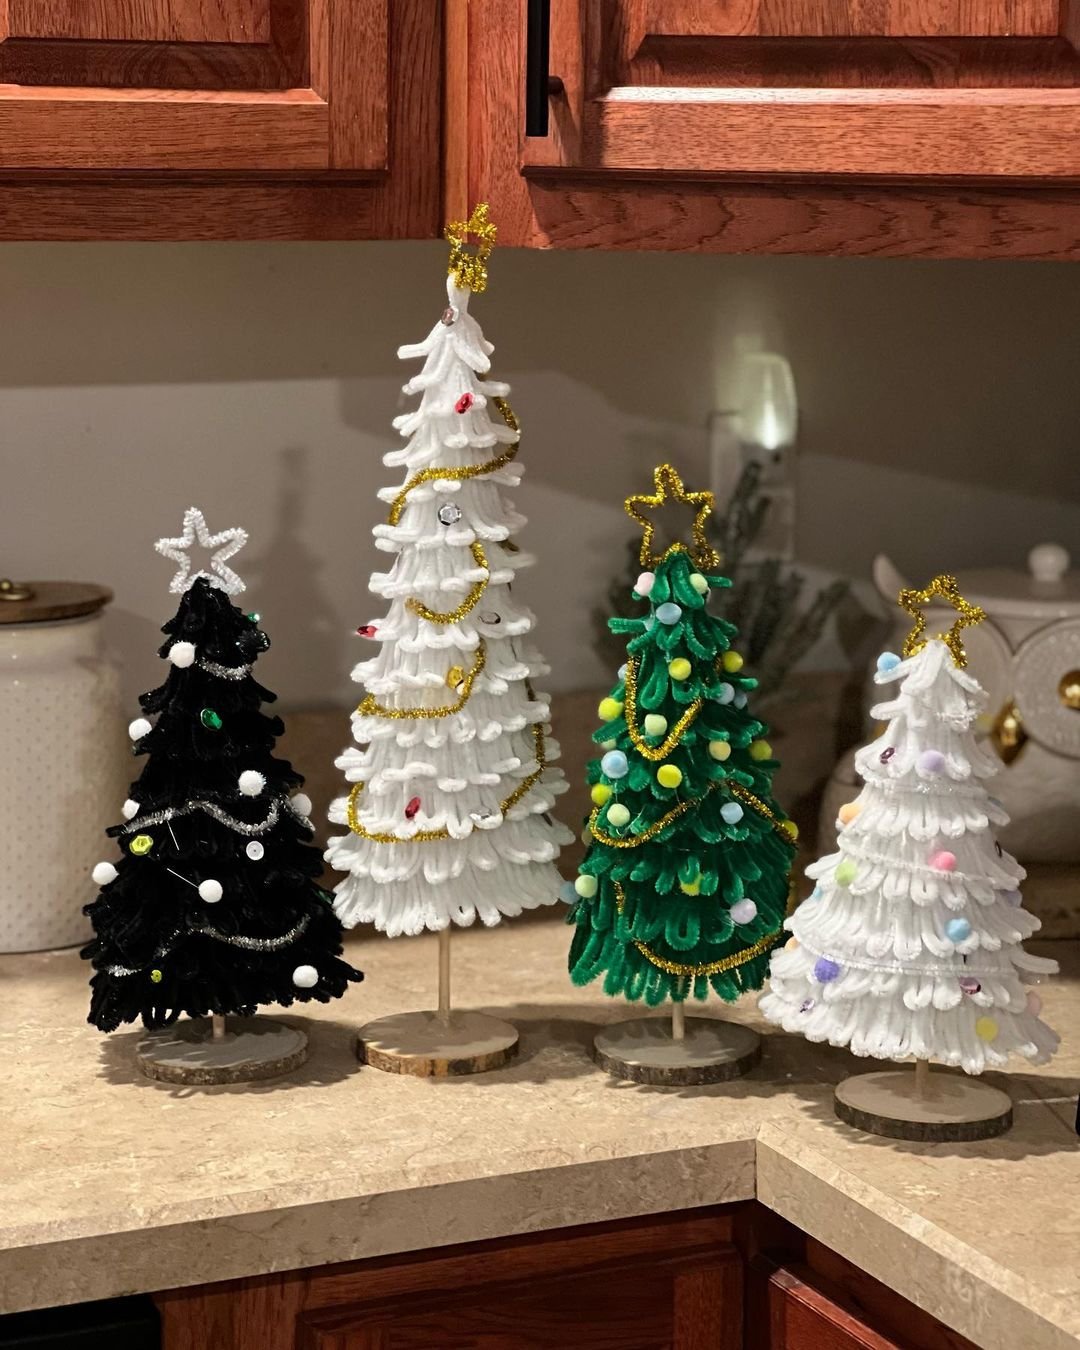 Three Christmas trees made of pipe cleaners on a kitchen counter.